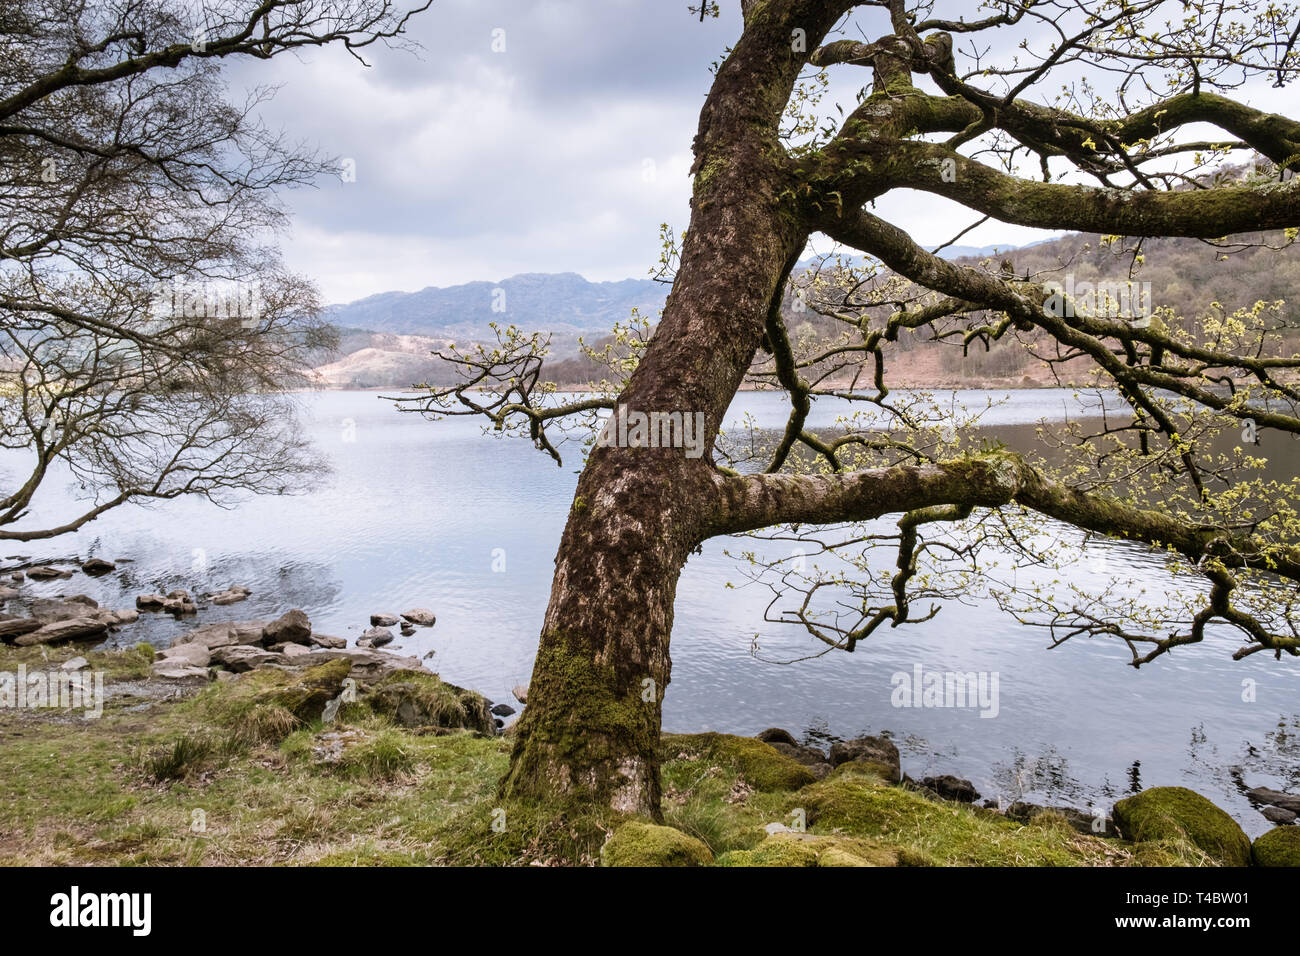 Scenic view of Llyn Dinas, a lake in Snowdonia National Park, Gwynedd, Wales, April 2019. Stock Photo